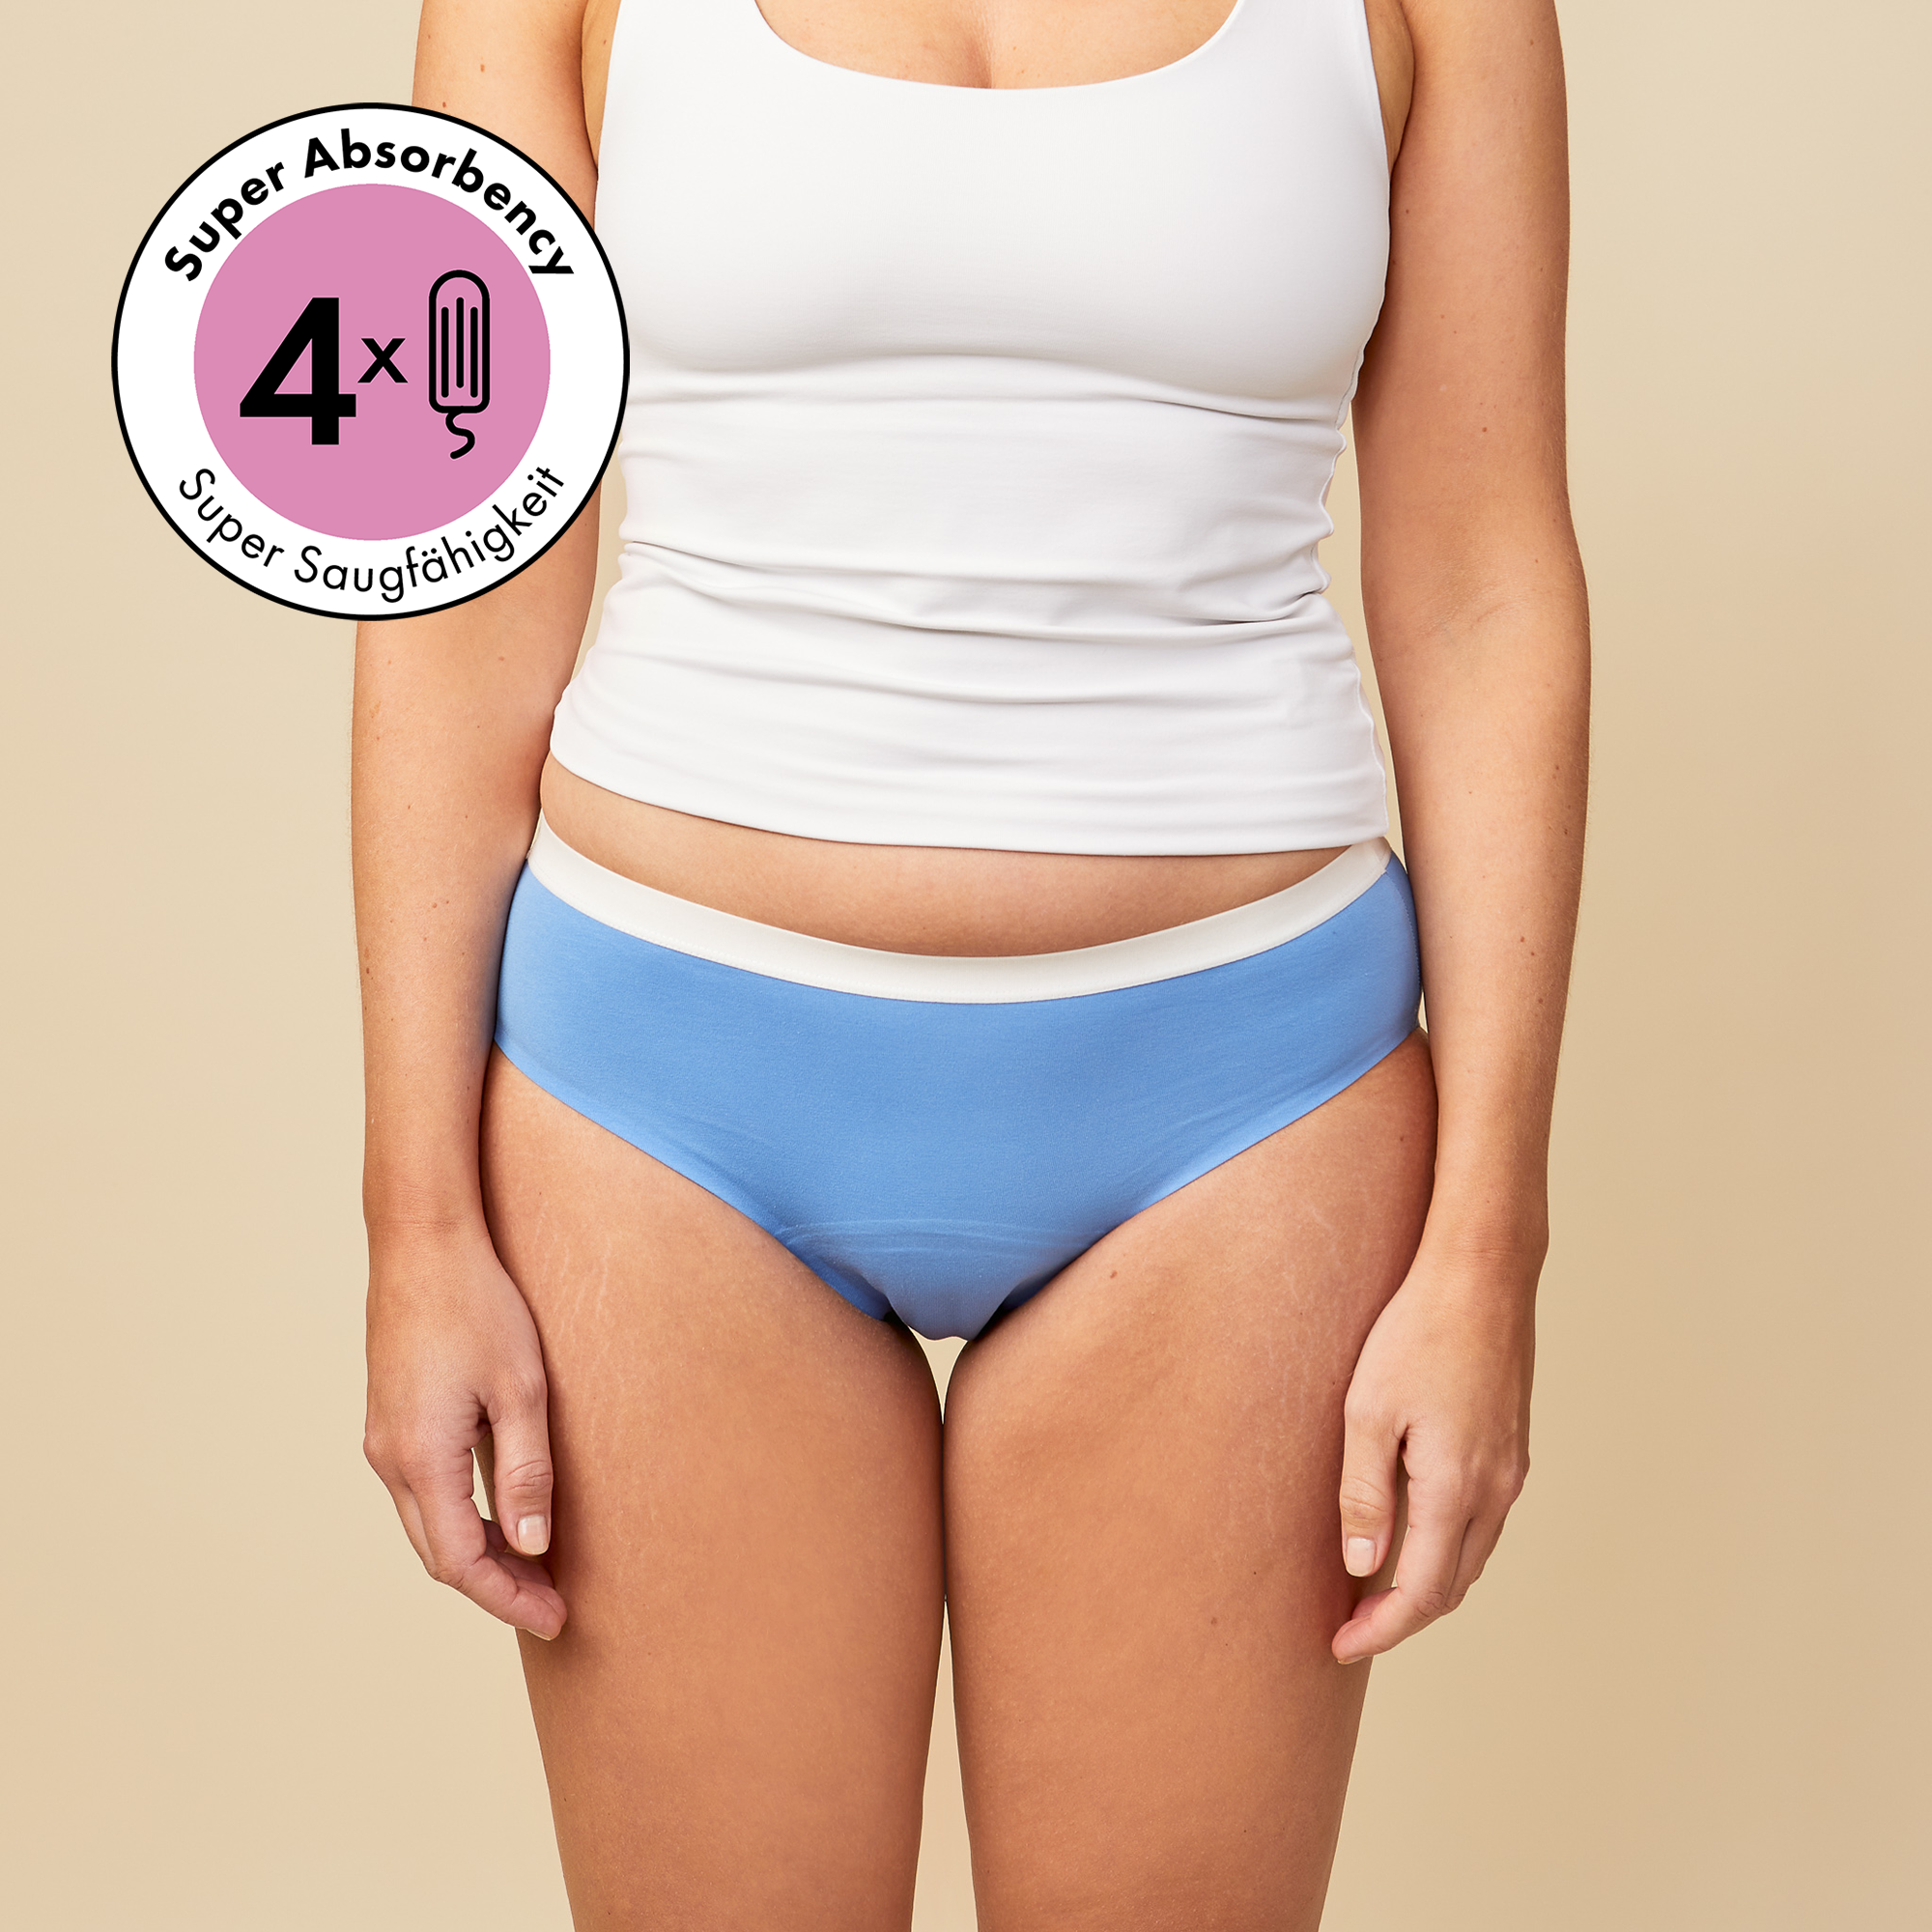 dais period underwear in hipster cut in blue with white edges designed for teens shown on a model from the front. Super absorbency of up to 4 tampons.